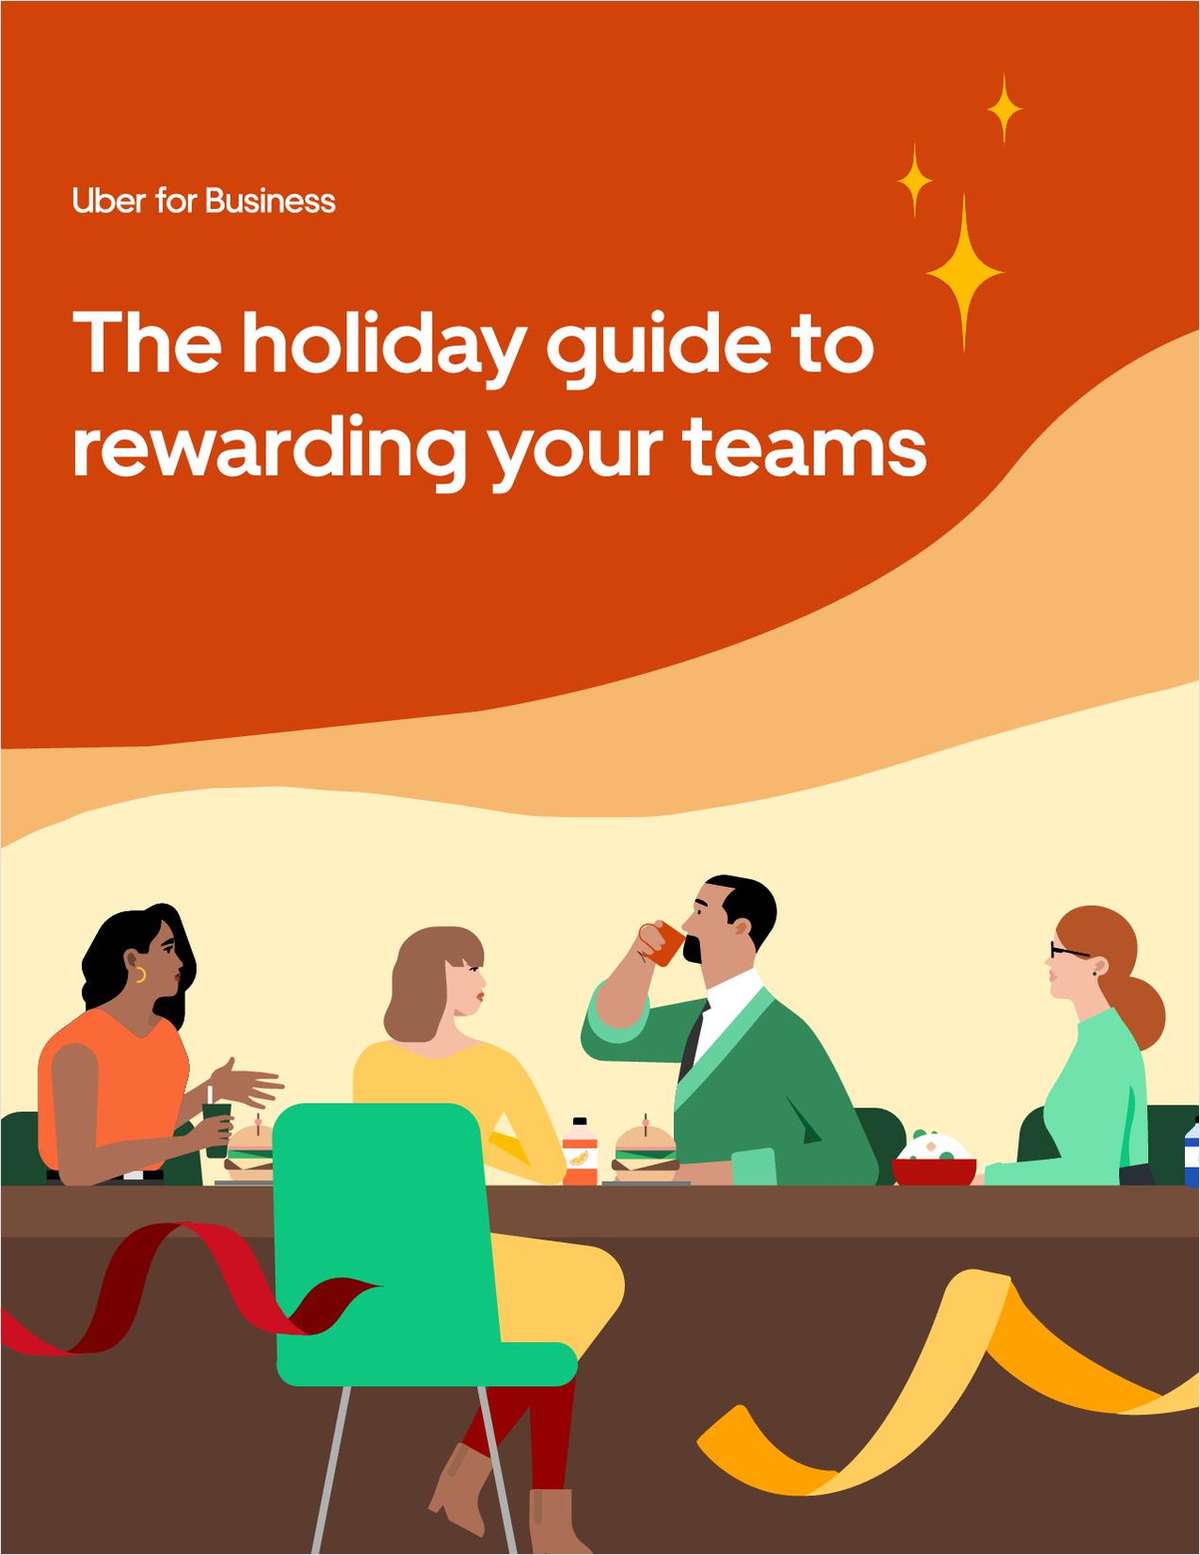 The holiday guide to rewarding your teams